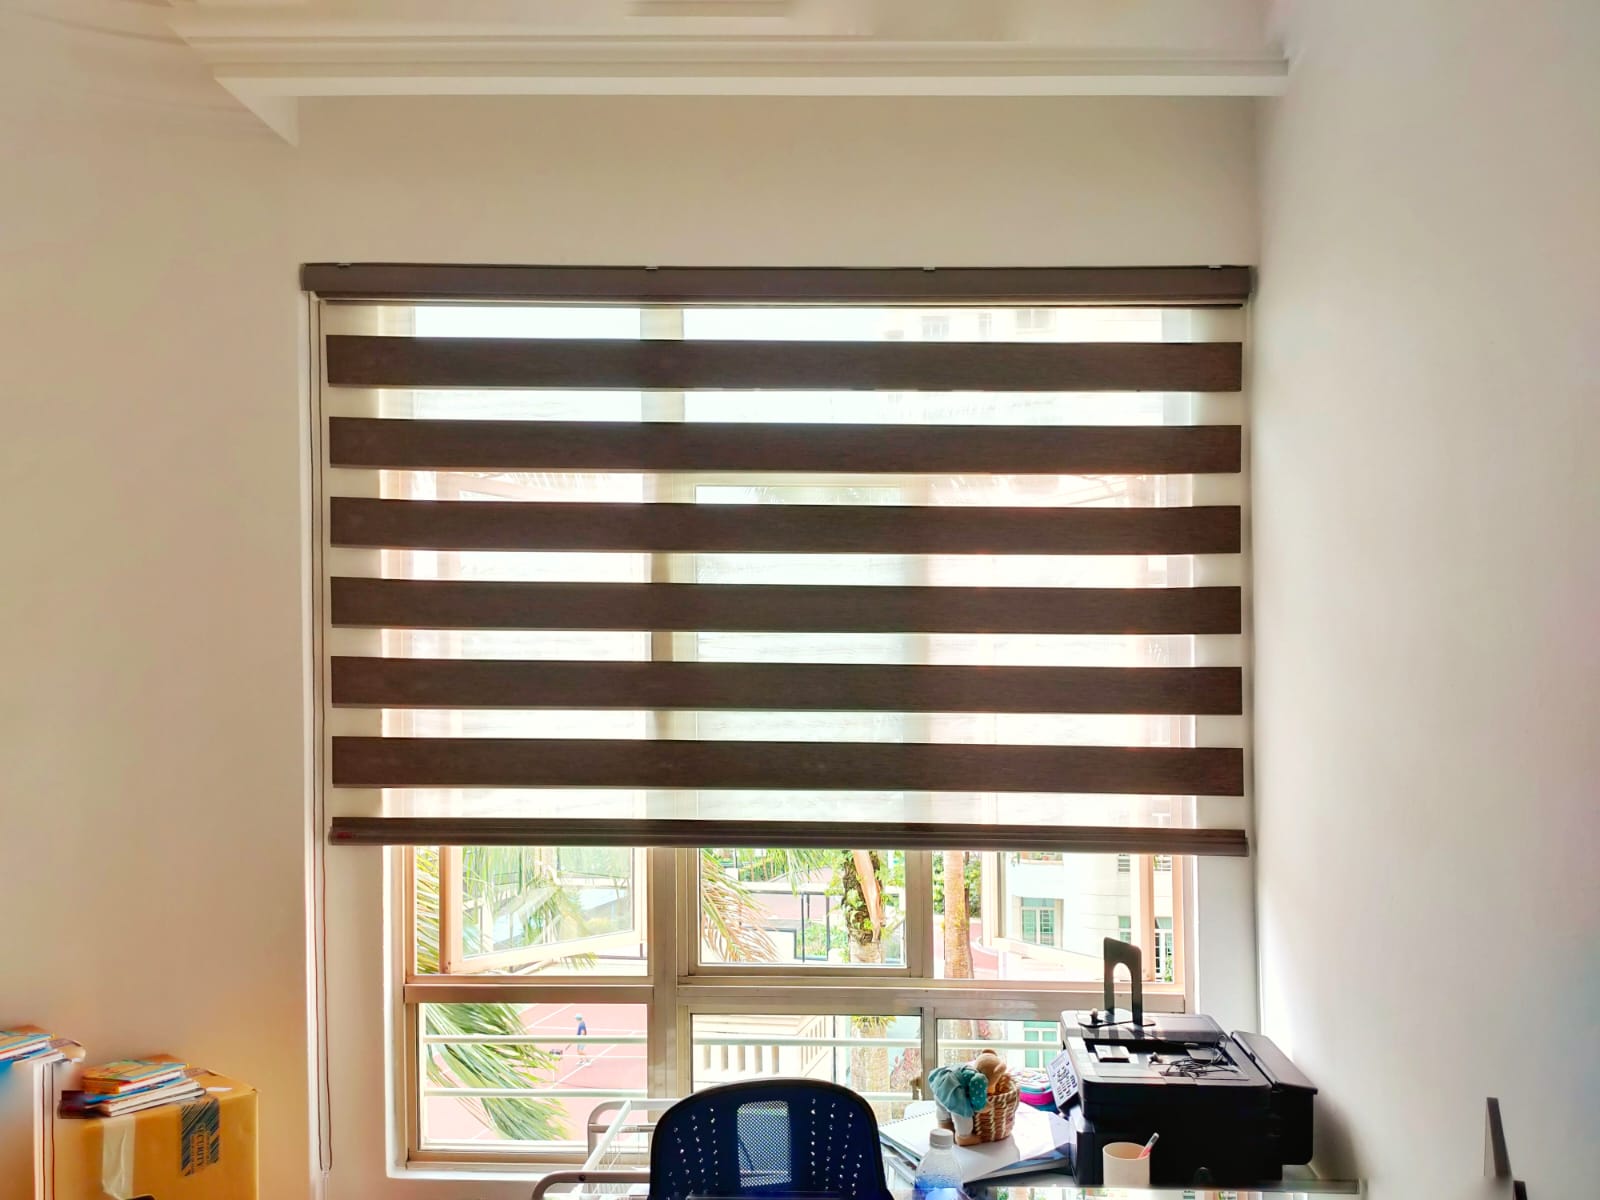 This is a Picture of Korean combi blinds installed at 61 Choa Chu Kang Loop, Singapore 689668